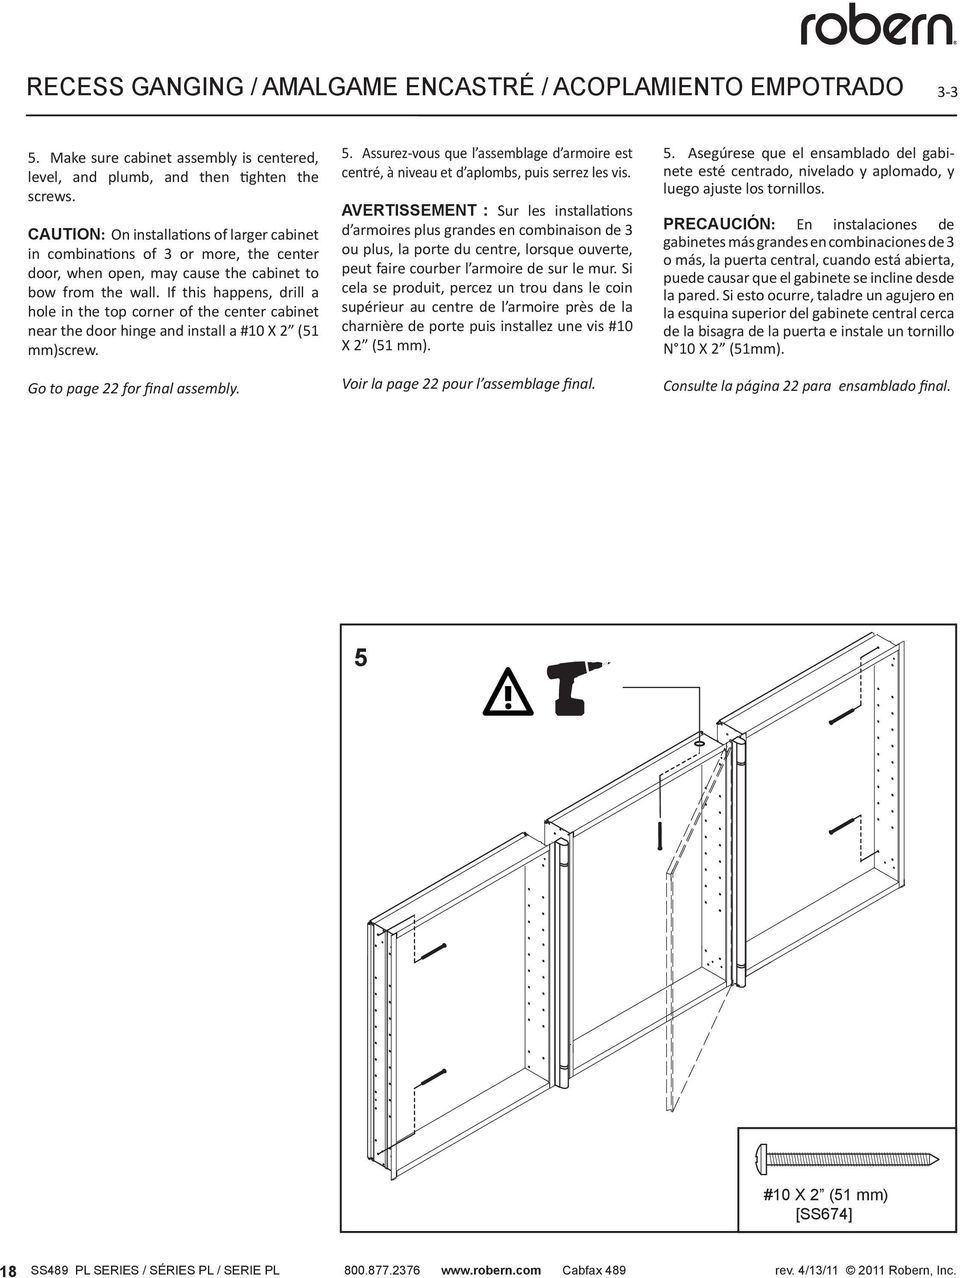 If this happens, drill a hole in the top corner of the center cabinet near the door hinge and install a #10 X 2 (51 mm)screw. Go to page 22 for final assembly. 5.